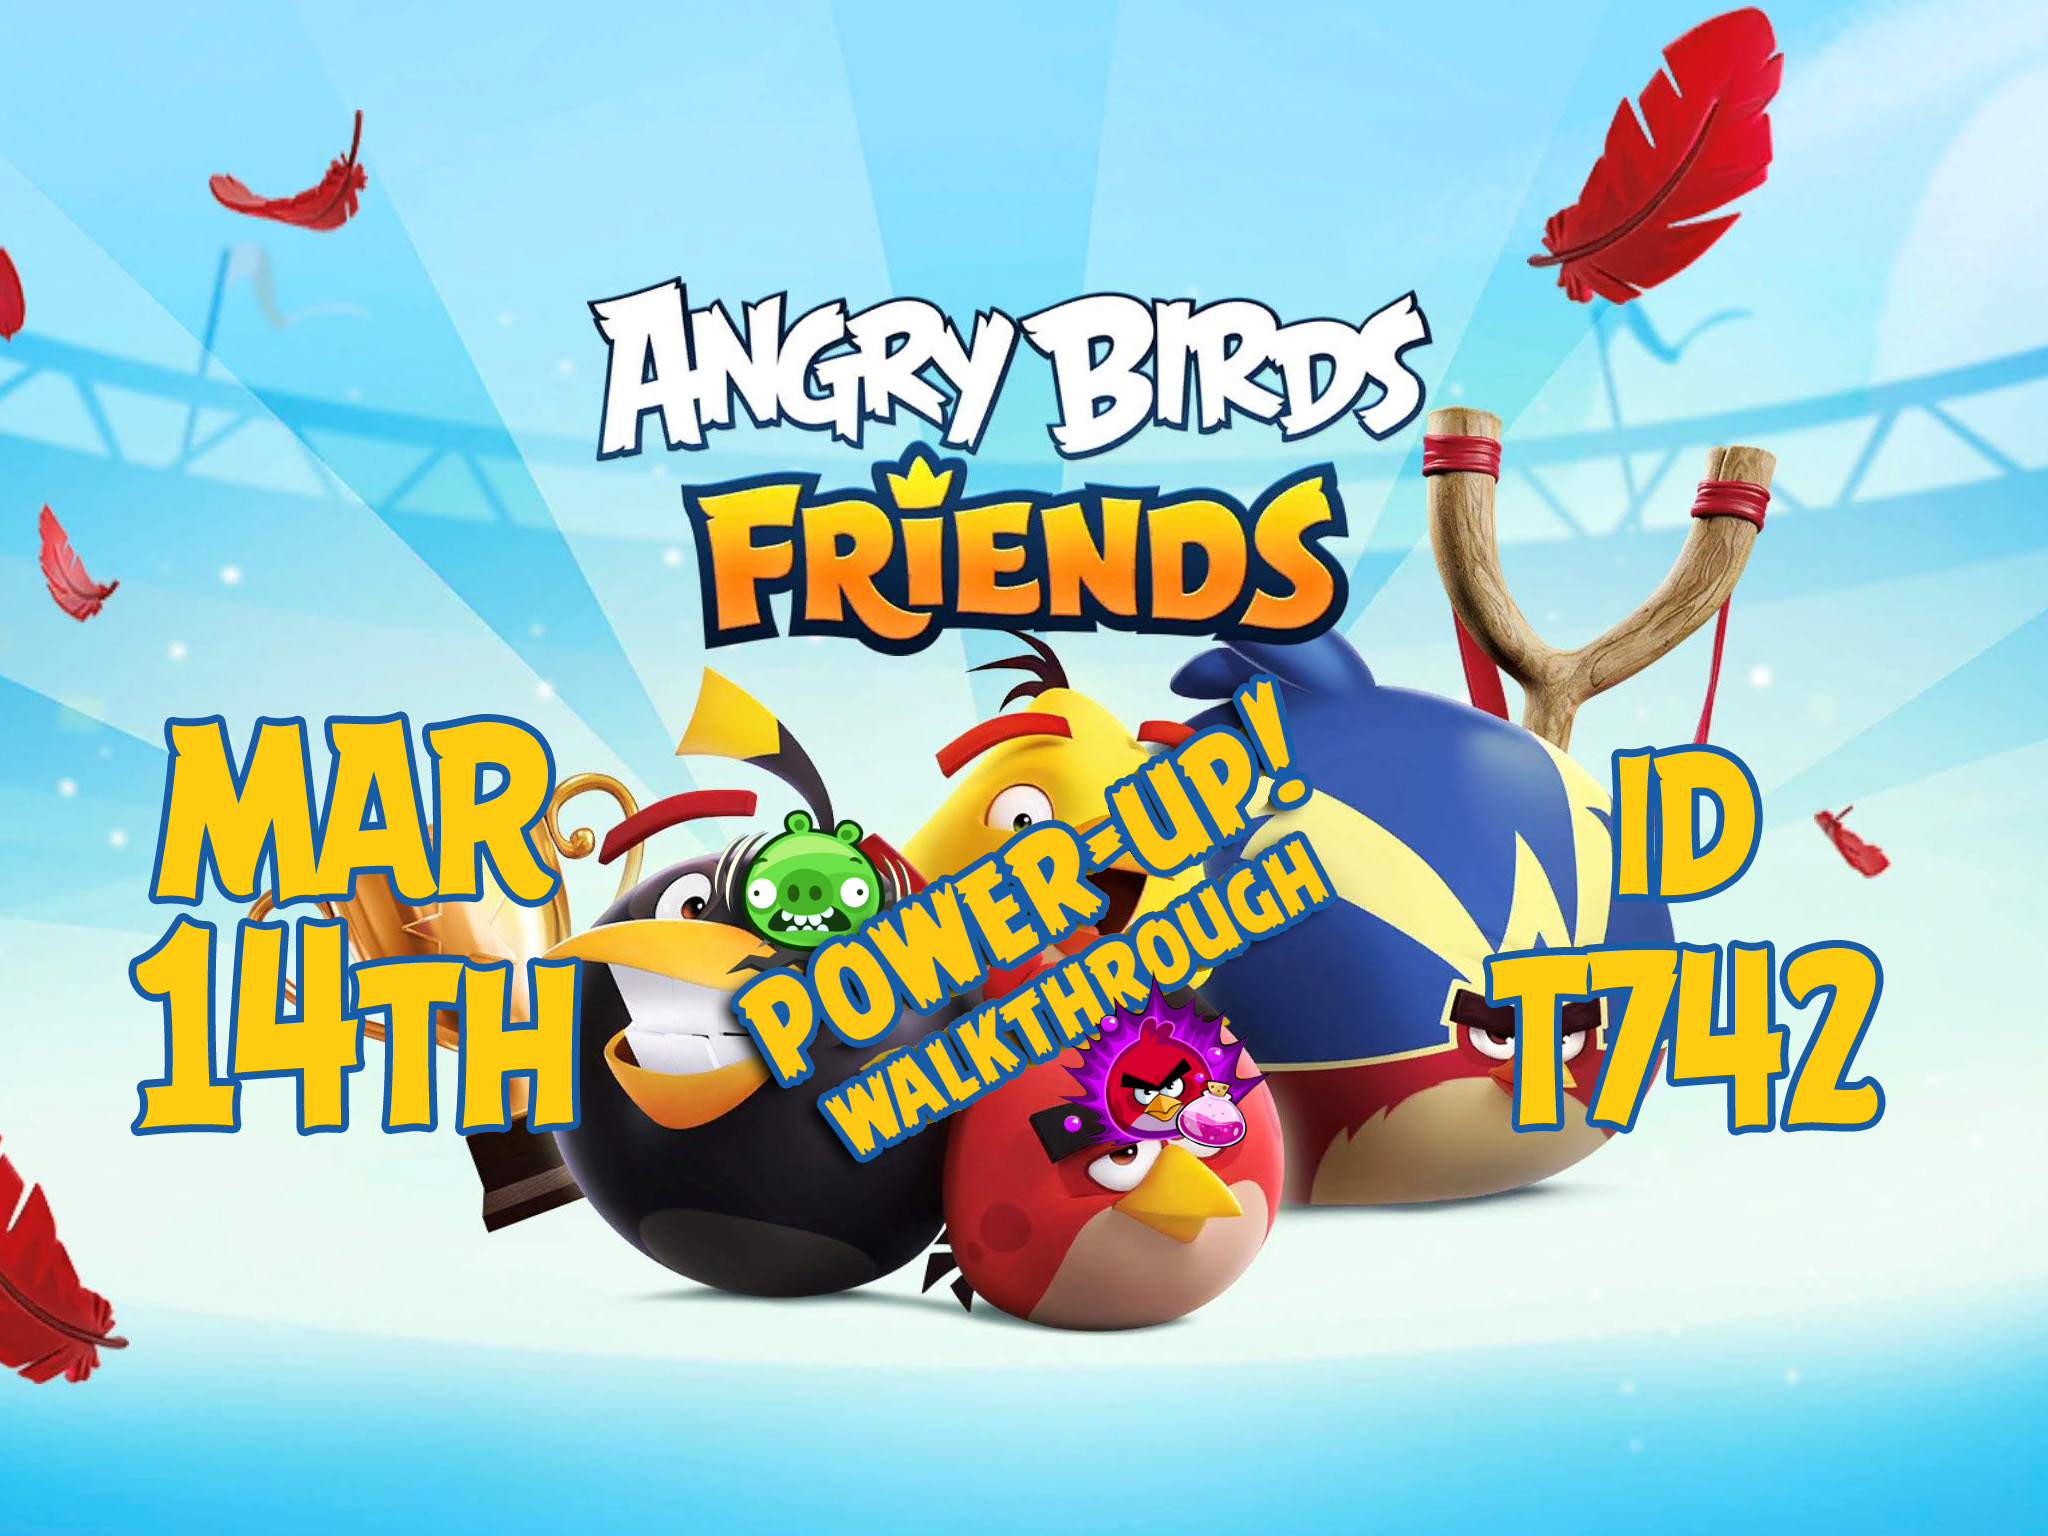 Angry-Birds-Friends-Tournament-T742-Feature-Image-PU